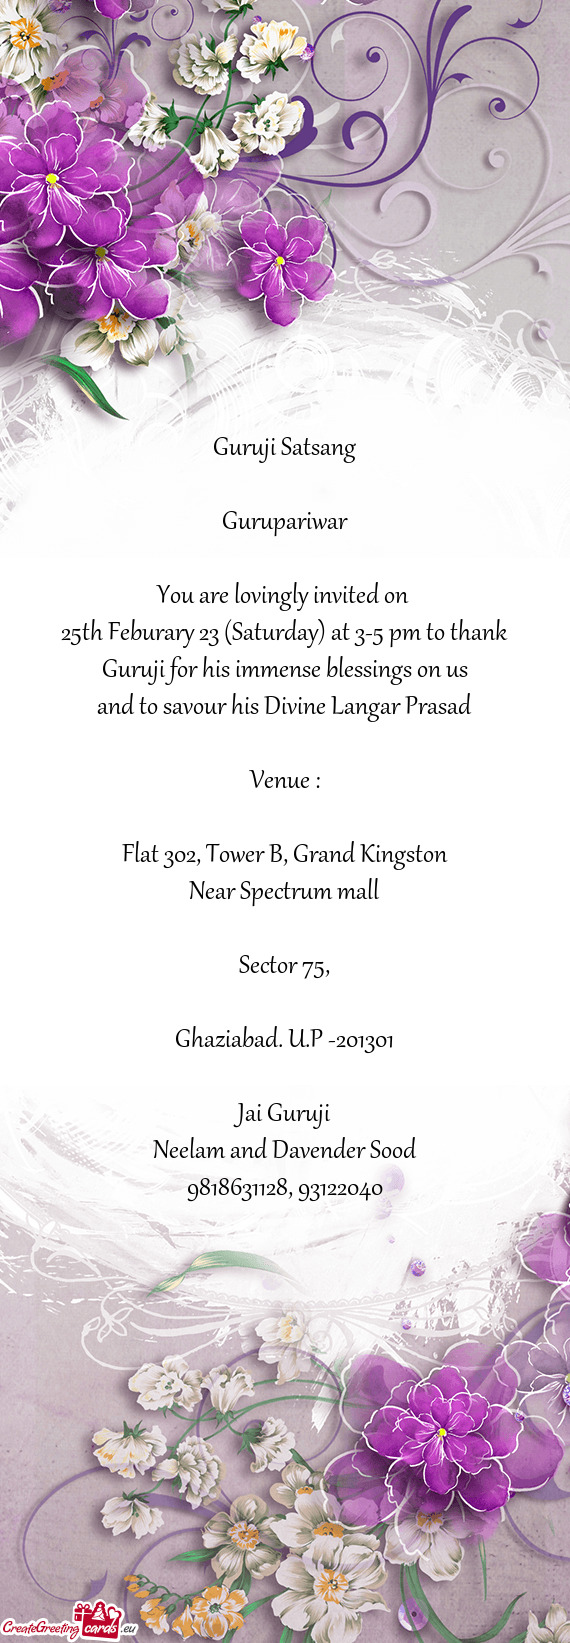 25th Feburary 23 (Saturday) at 3-5 pm to thank Guruji for his immense blessings on us